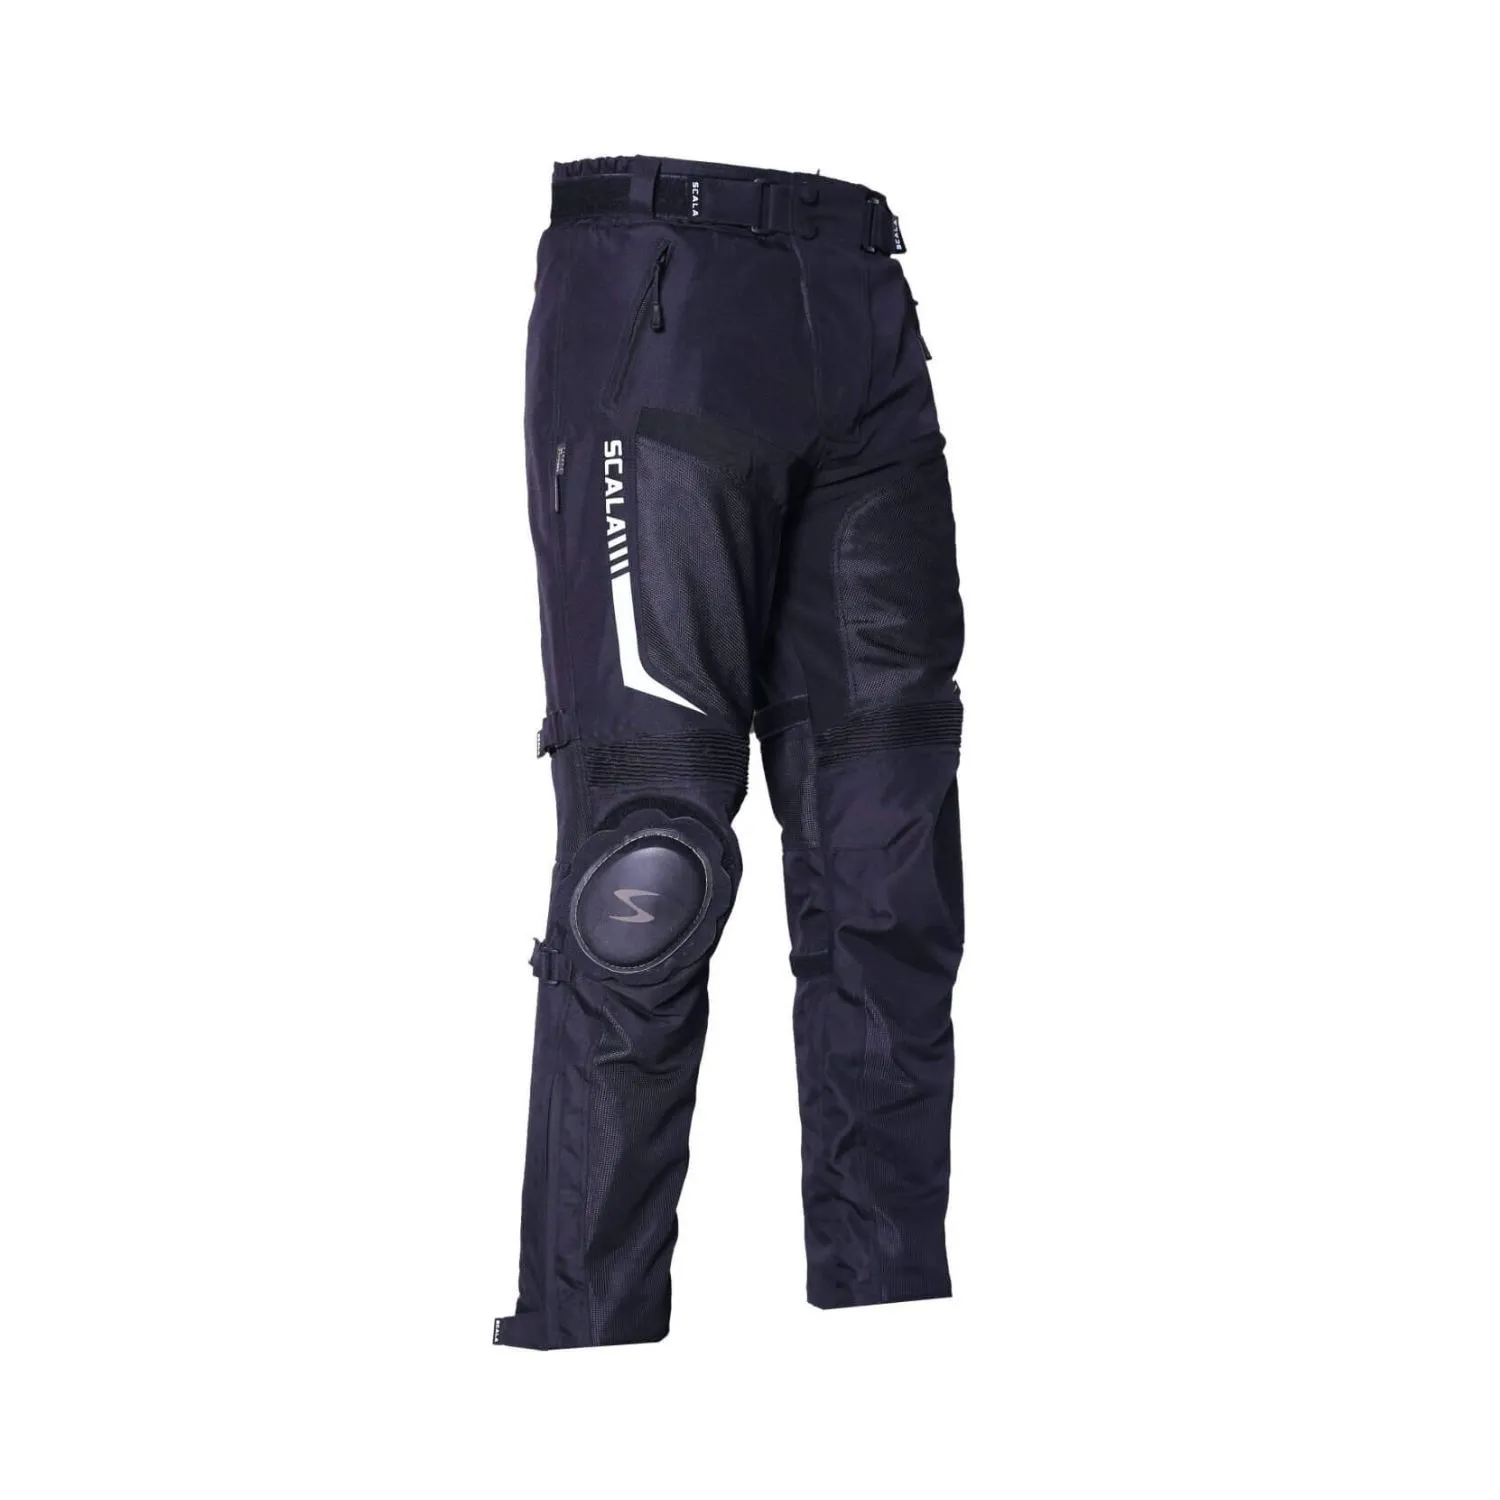 Fly Racing Patrol Over Boot Motorcycle Riding Pants